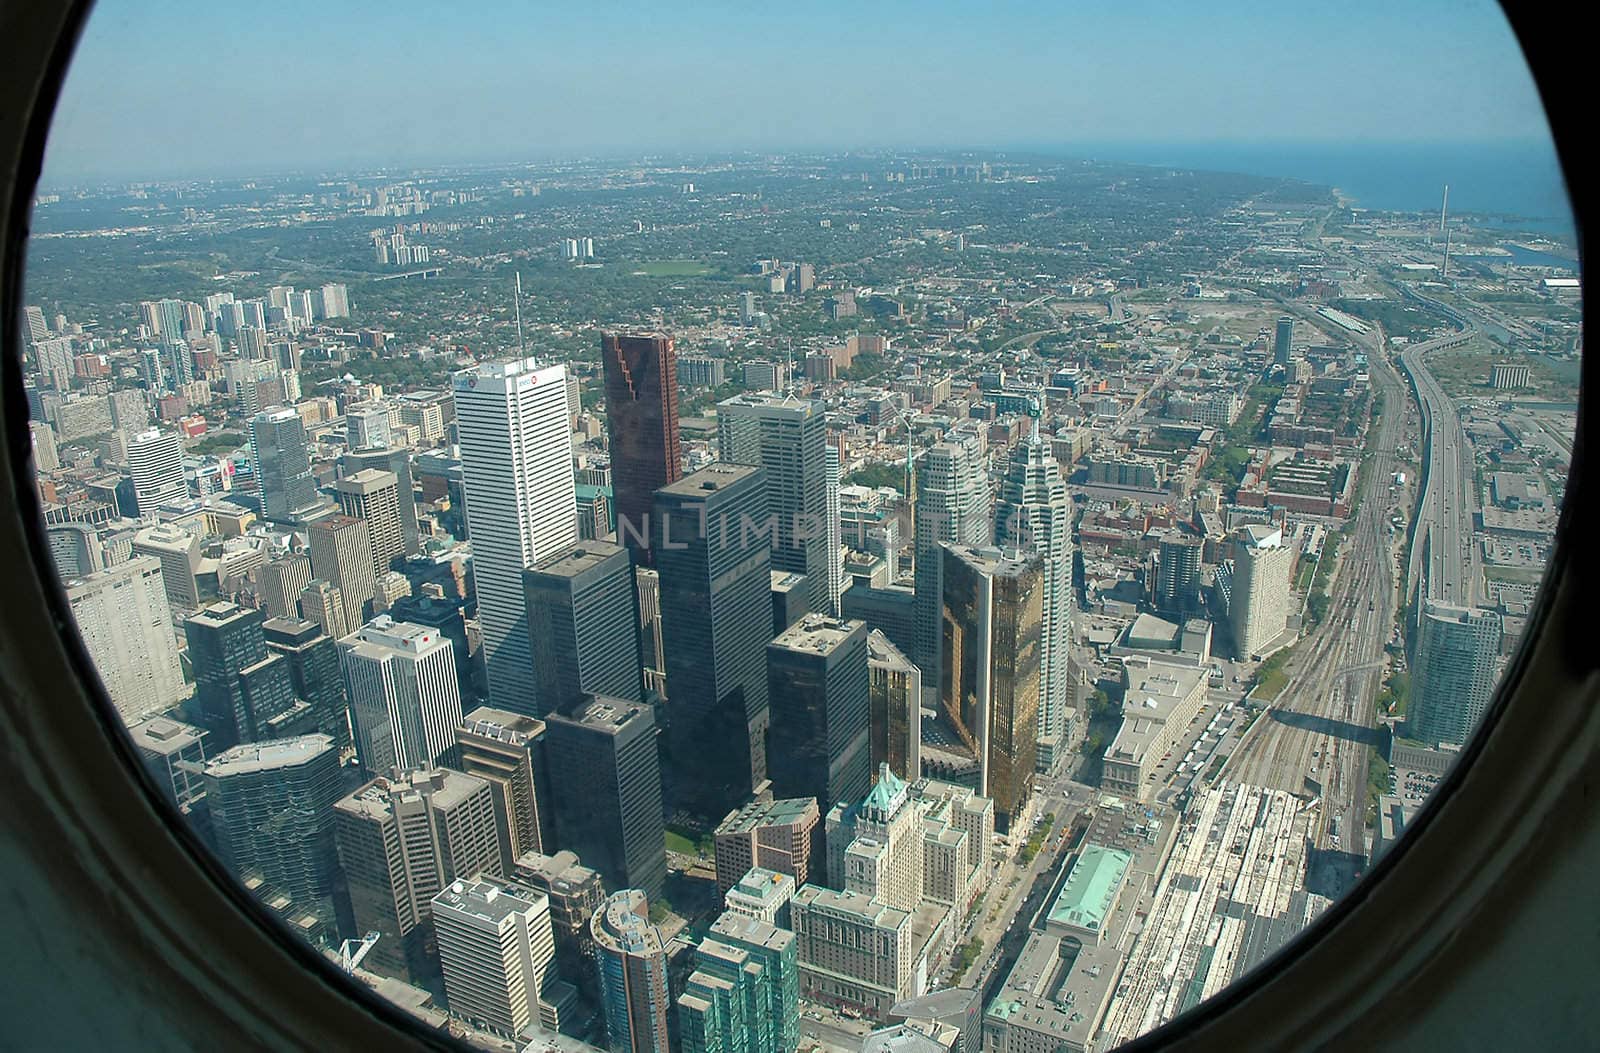 view from a window in CN Tower, Toronto, Canada